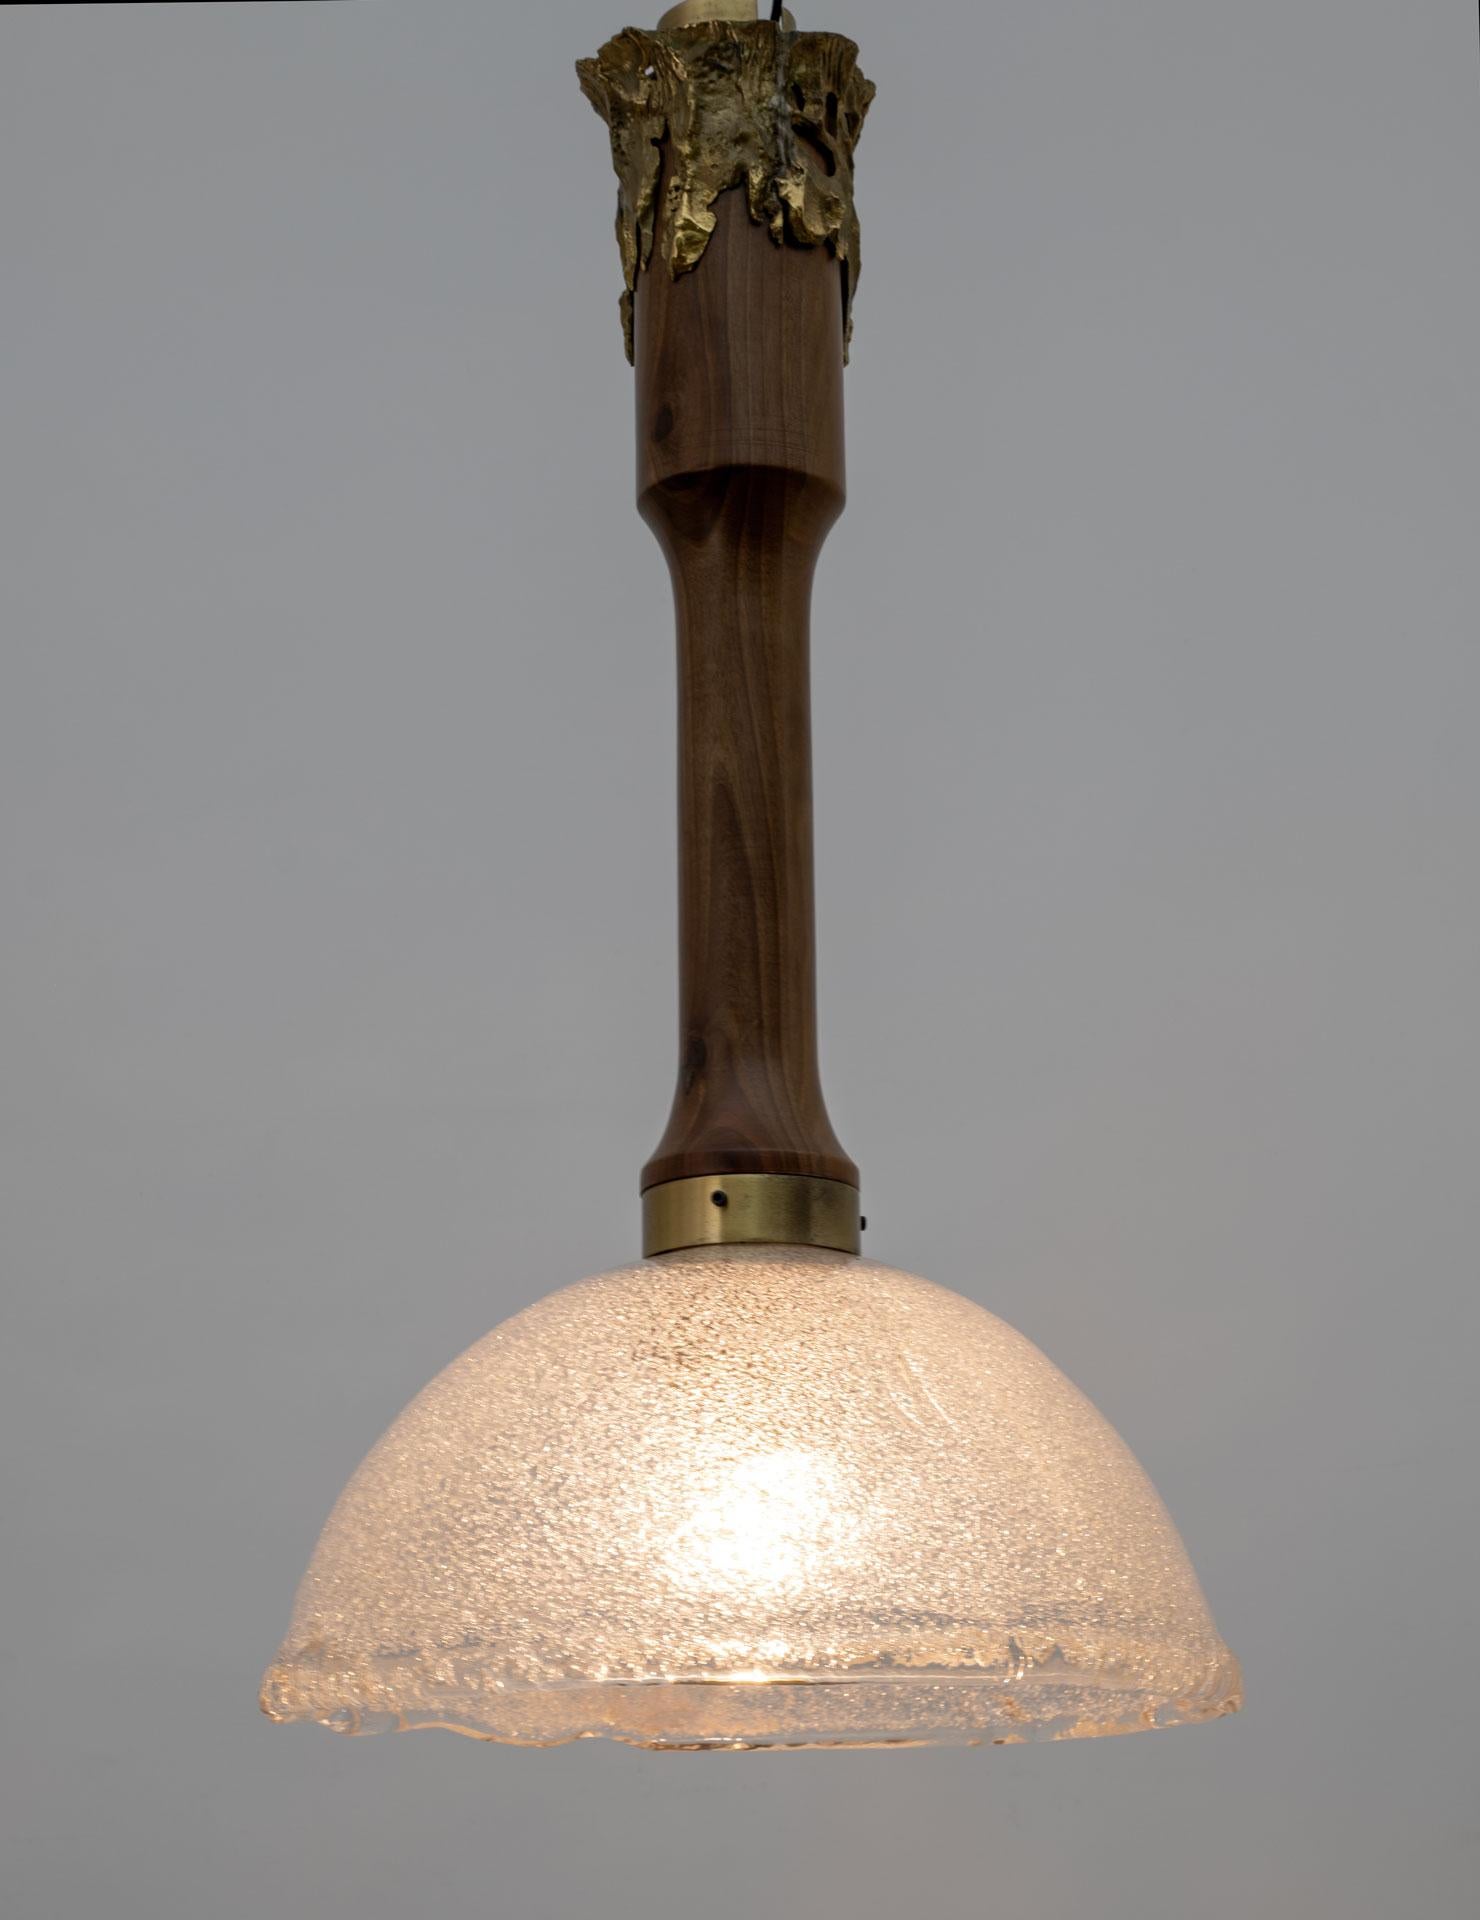 This particular ceiling lamp is equipped with a Graniglia Murano glass lampshade and a solid wood rod. The upper end is surrounded by an irregular bronze casting engraved with the author's name 